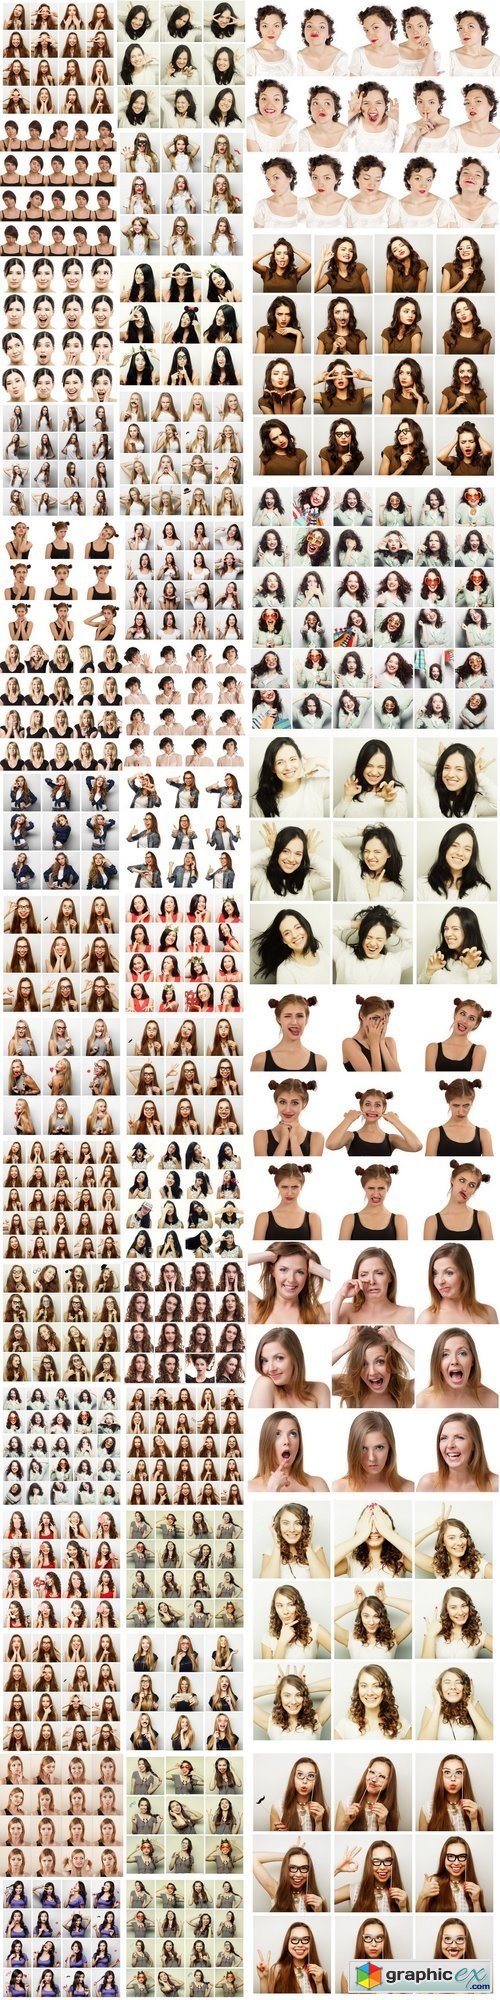 Collage of woman different facial expressions